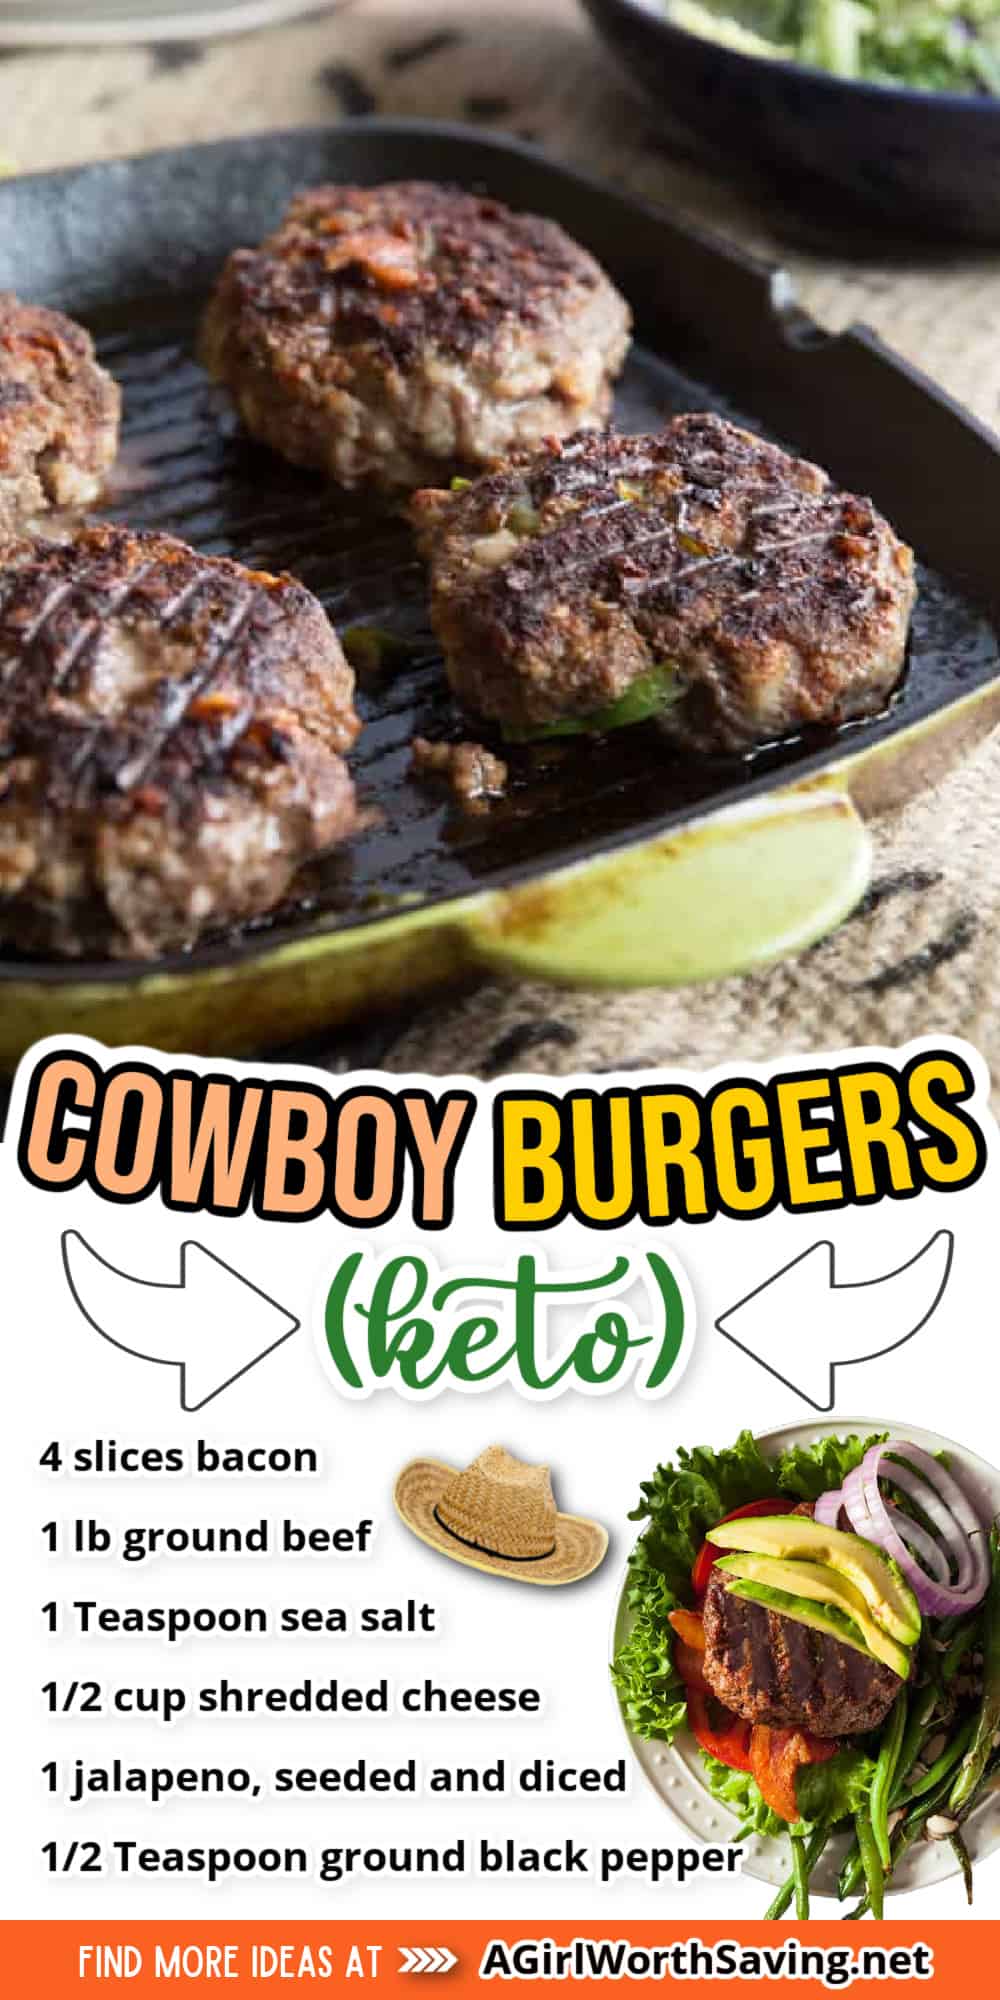 Few things in life are as satisfying as a delicious and hearty burger. This cowboy burger is made with ground beef, bacon, jalapeños, onion, BBQ sauce and cheddar cheese, and it's perfect for a summer cookout or a casual dinner party. Serve it with some crispy fries and a cold beer, and you'll be in cowboy heaven!